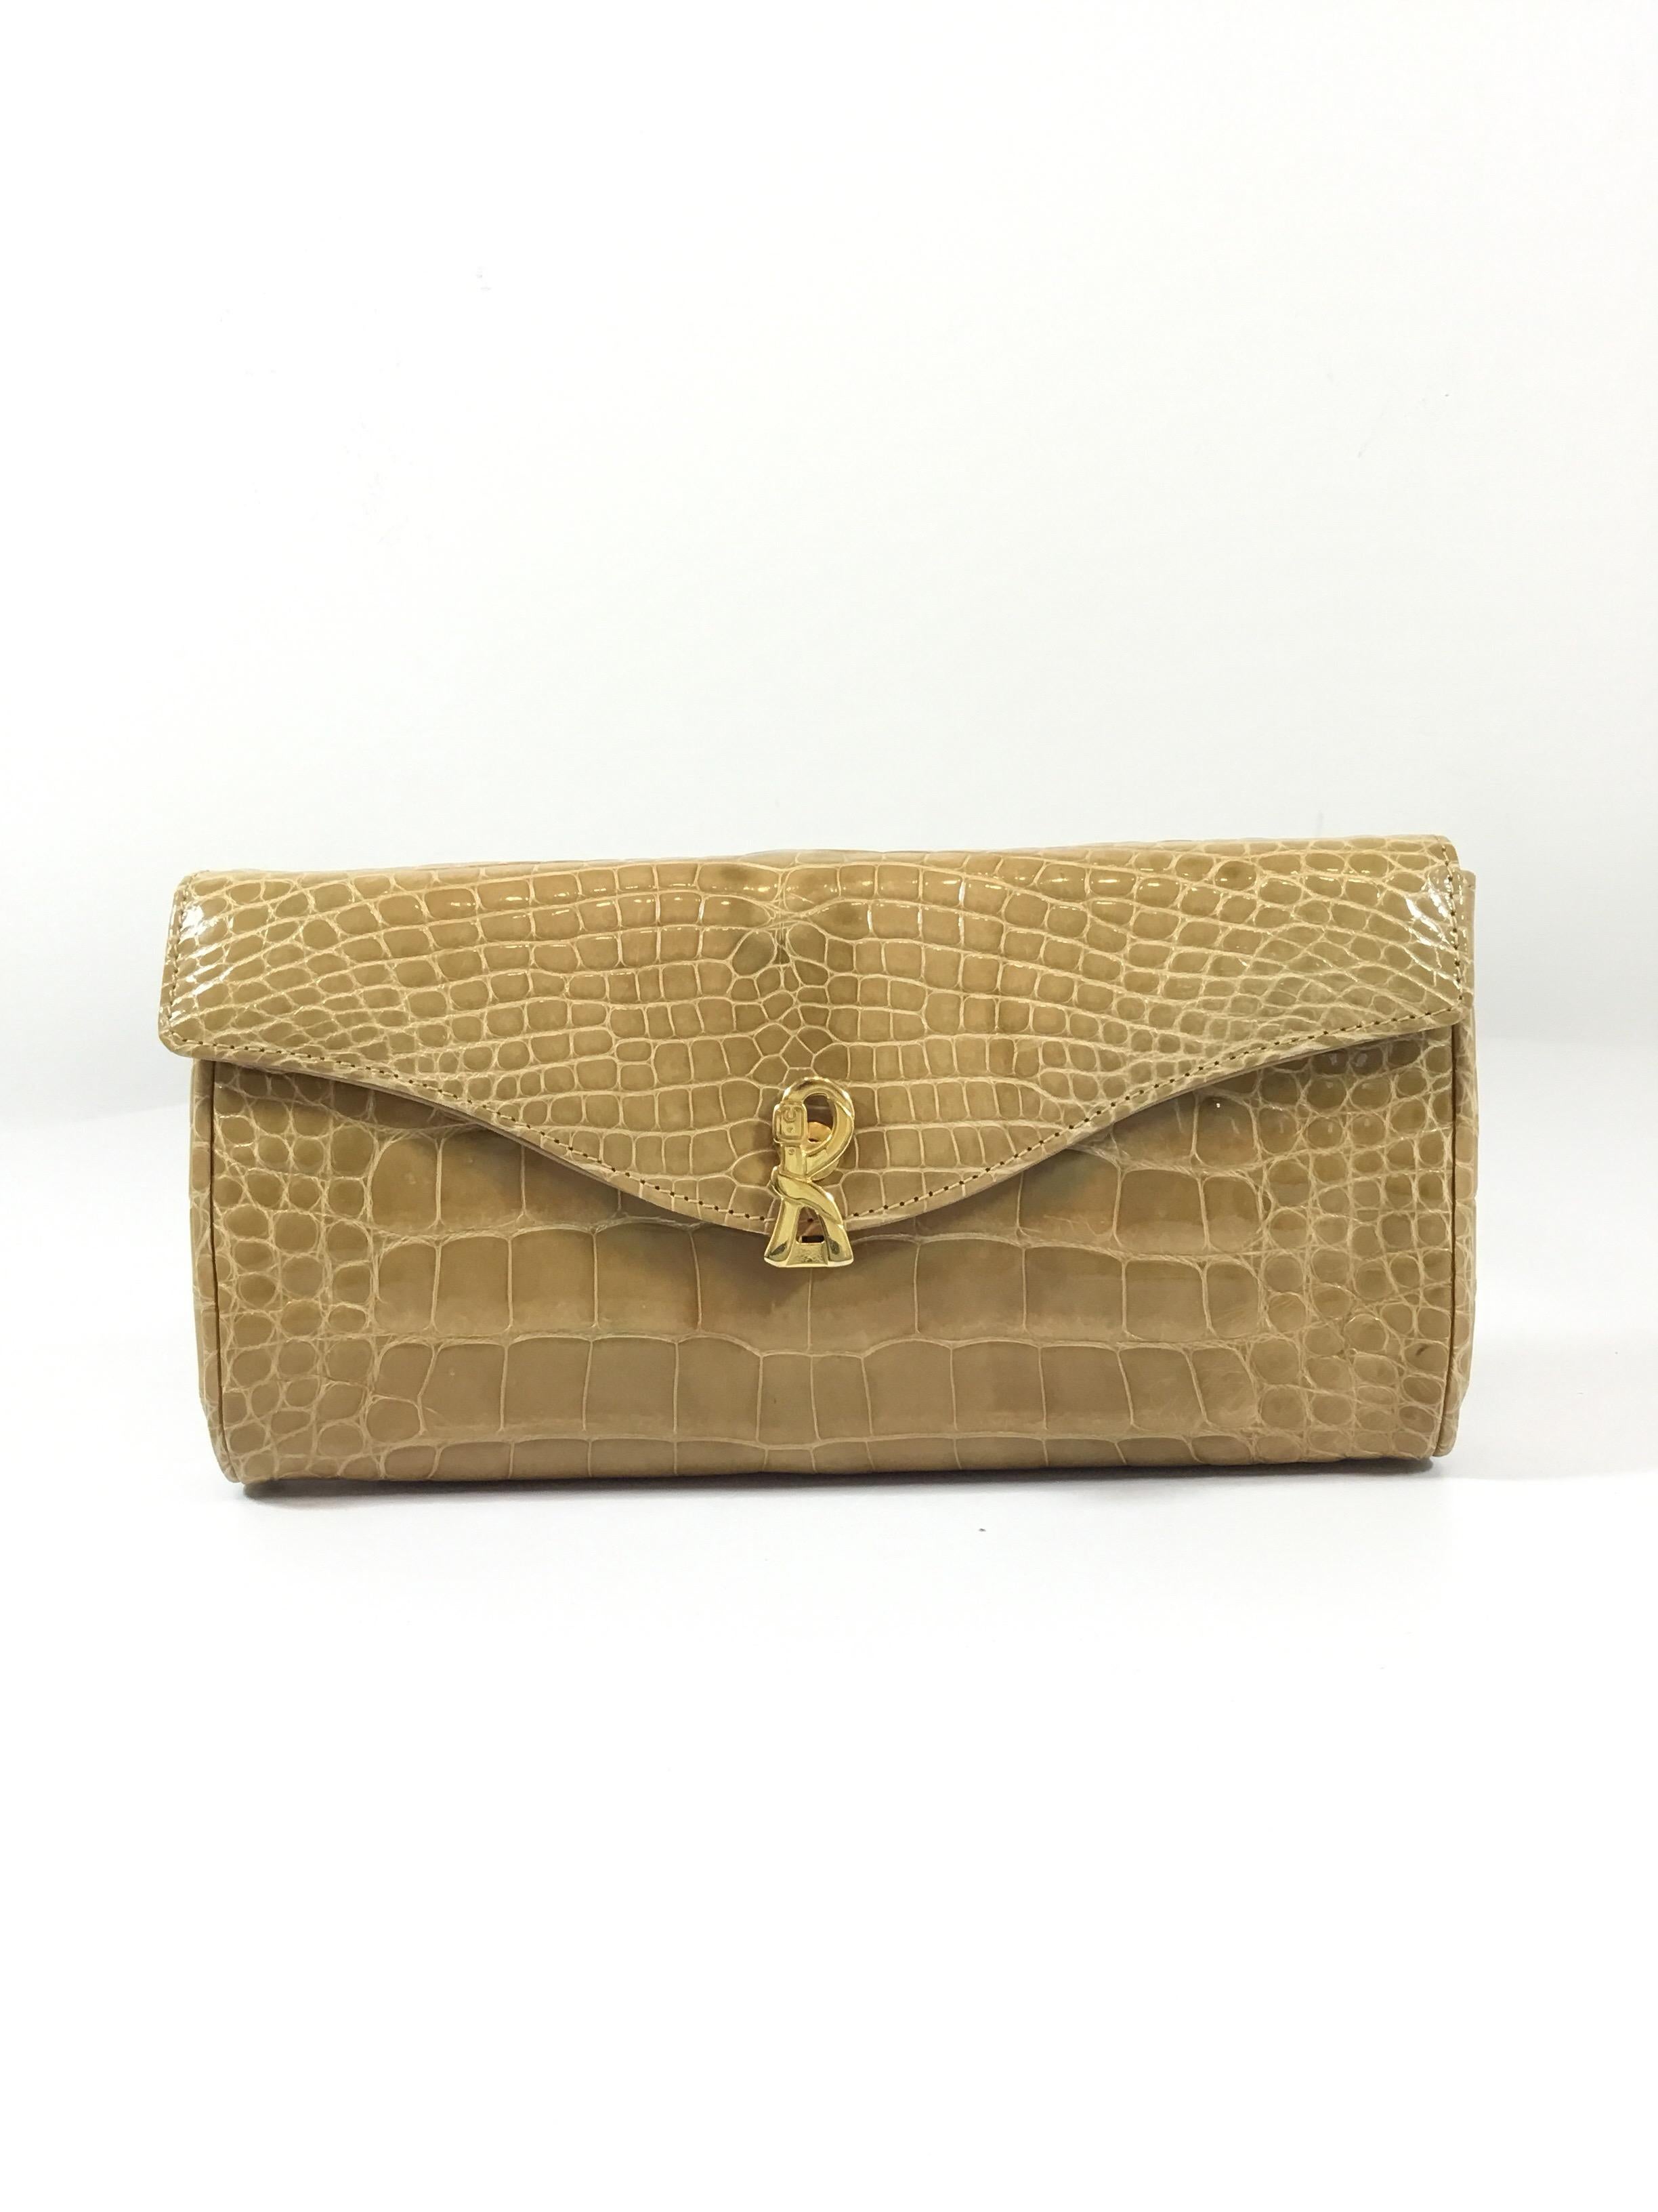 Roberta di Camerino exotic crocodile skin clutch purse featured in a beige with a dark green hue and a gold-tone metal chain handle that can be removed. Clutch bag has a metal flap clasp closure and is fully lined in leather with one slip pocket and